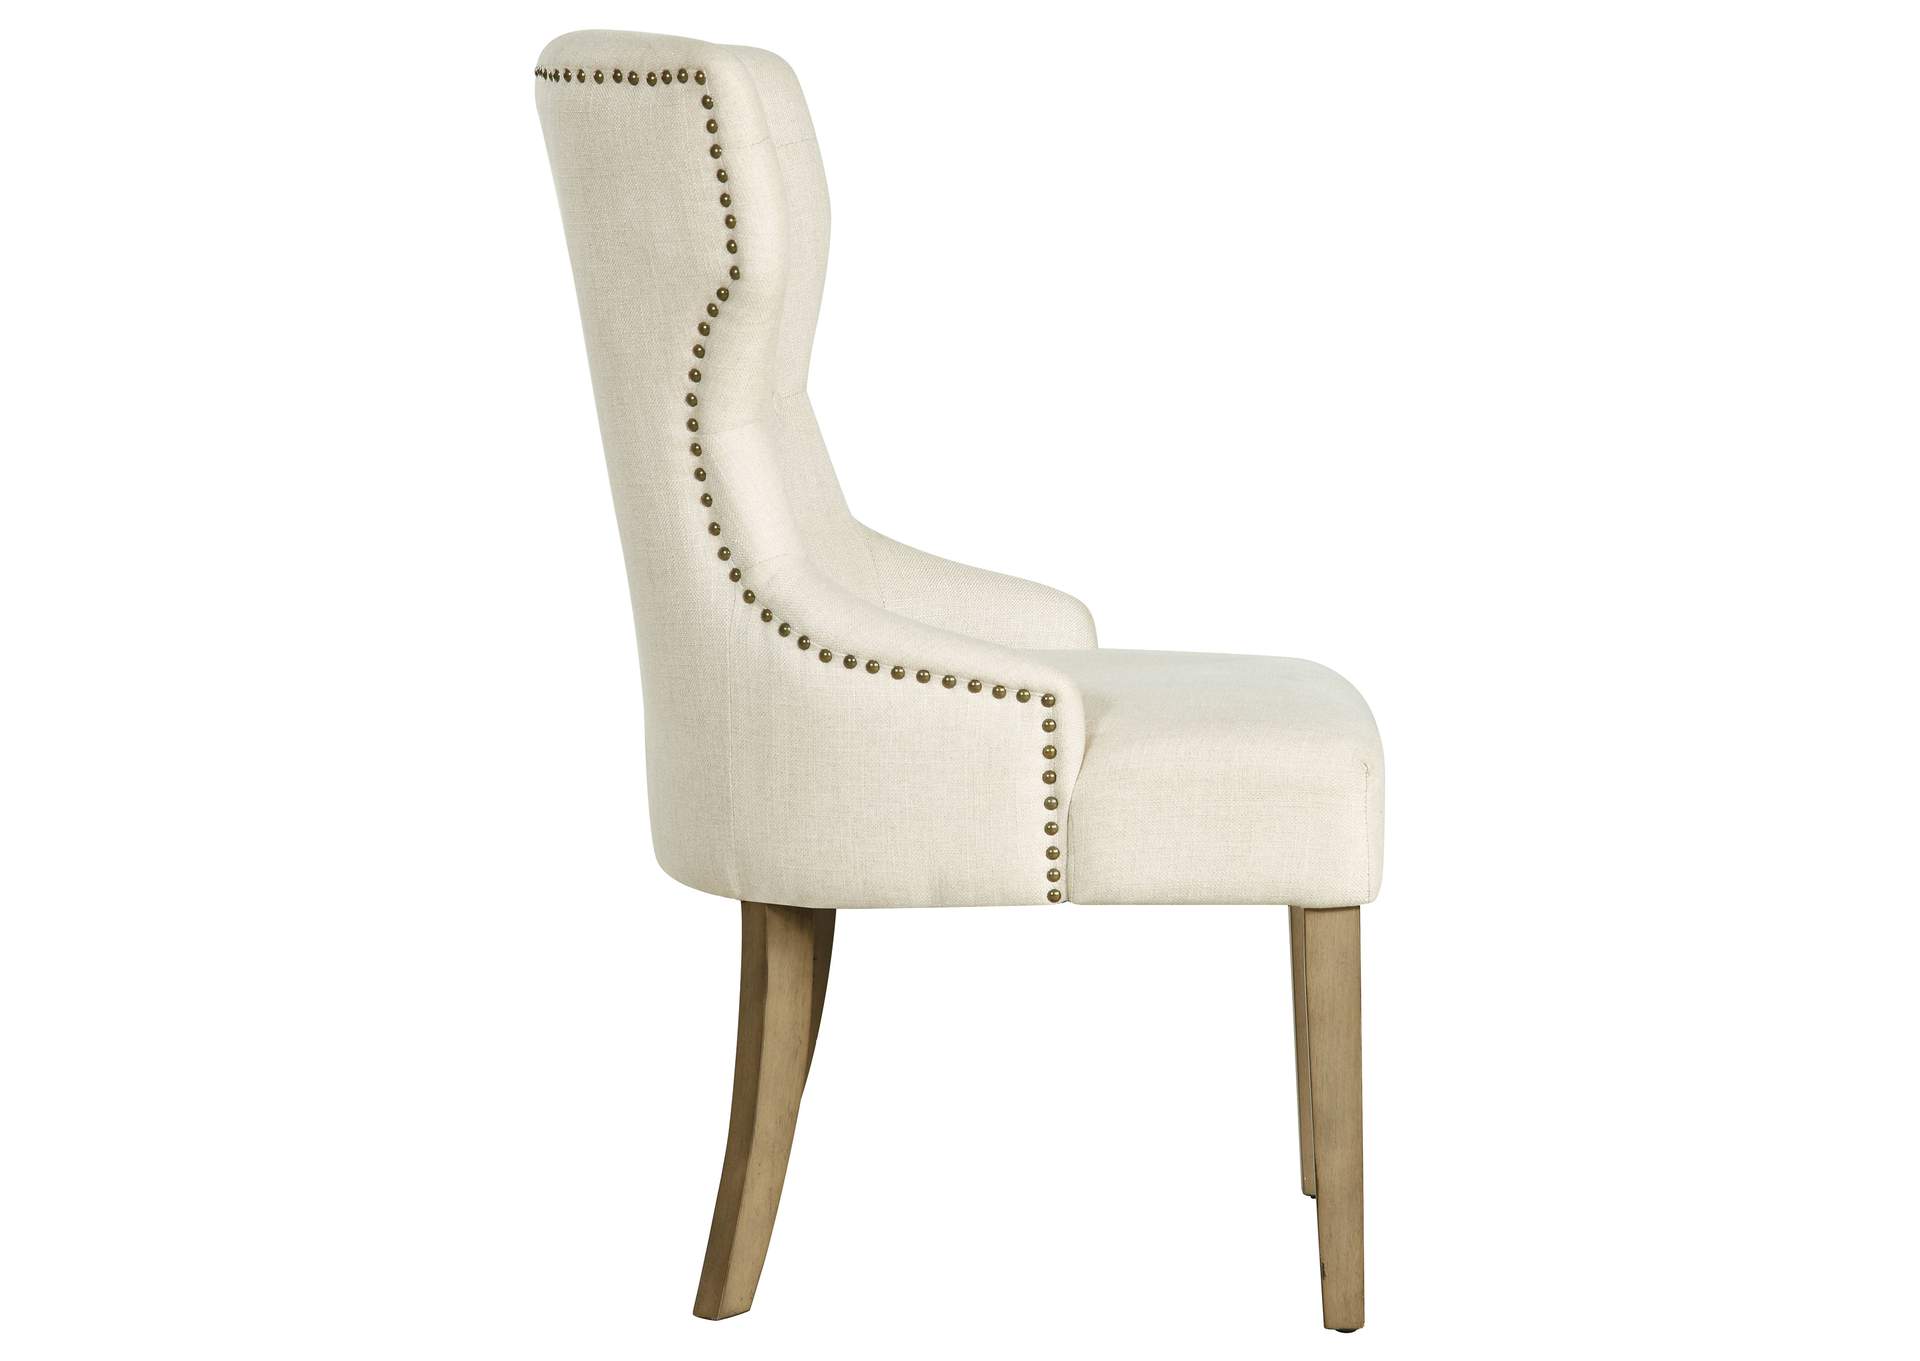 Baney Tufted Upholstered Dining Chair Beige,Coaster Furniture